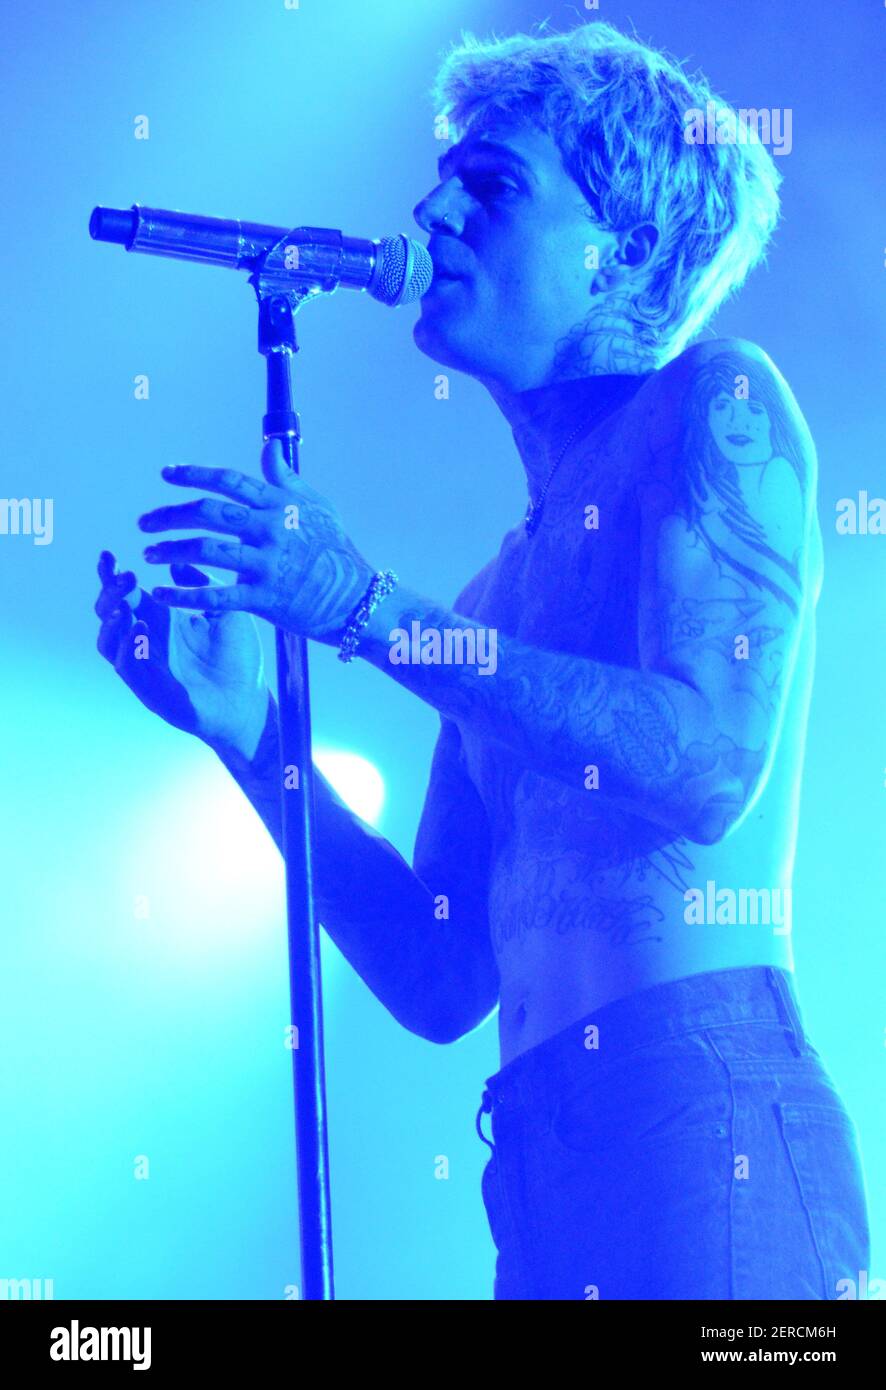 https://c8.alamy.com/comp/2ERCM6H/july-1-2018-lead-singer-jesse-rutherford-of-the-band-the-neighbourhood-performs-live-at-henry-maier-festival-park-during-summerfest-in-milwaukee-wisconsin-ricky-bassmancsmsipa-usa-2ERCM6H.jpg